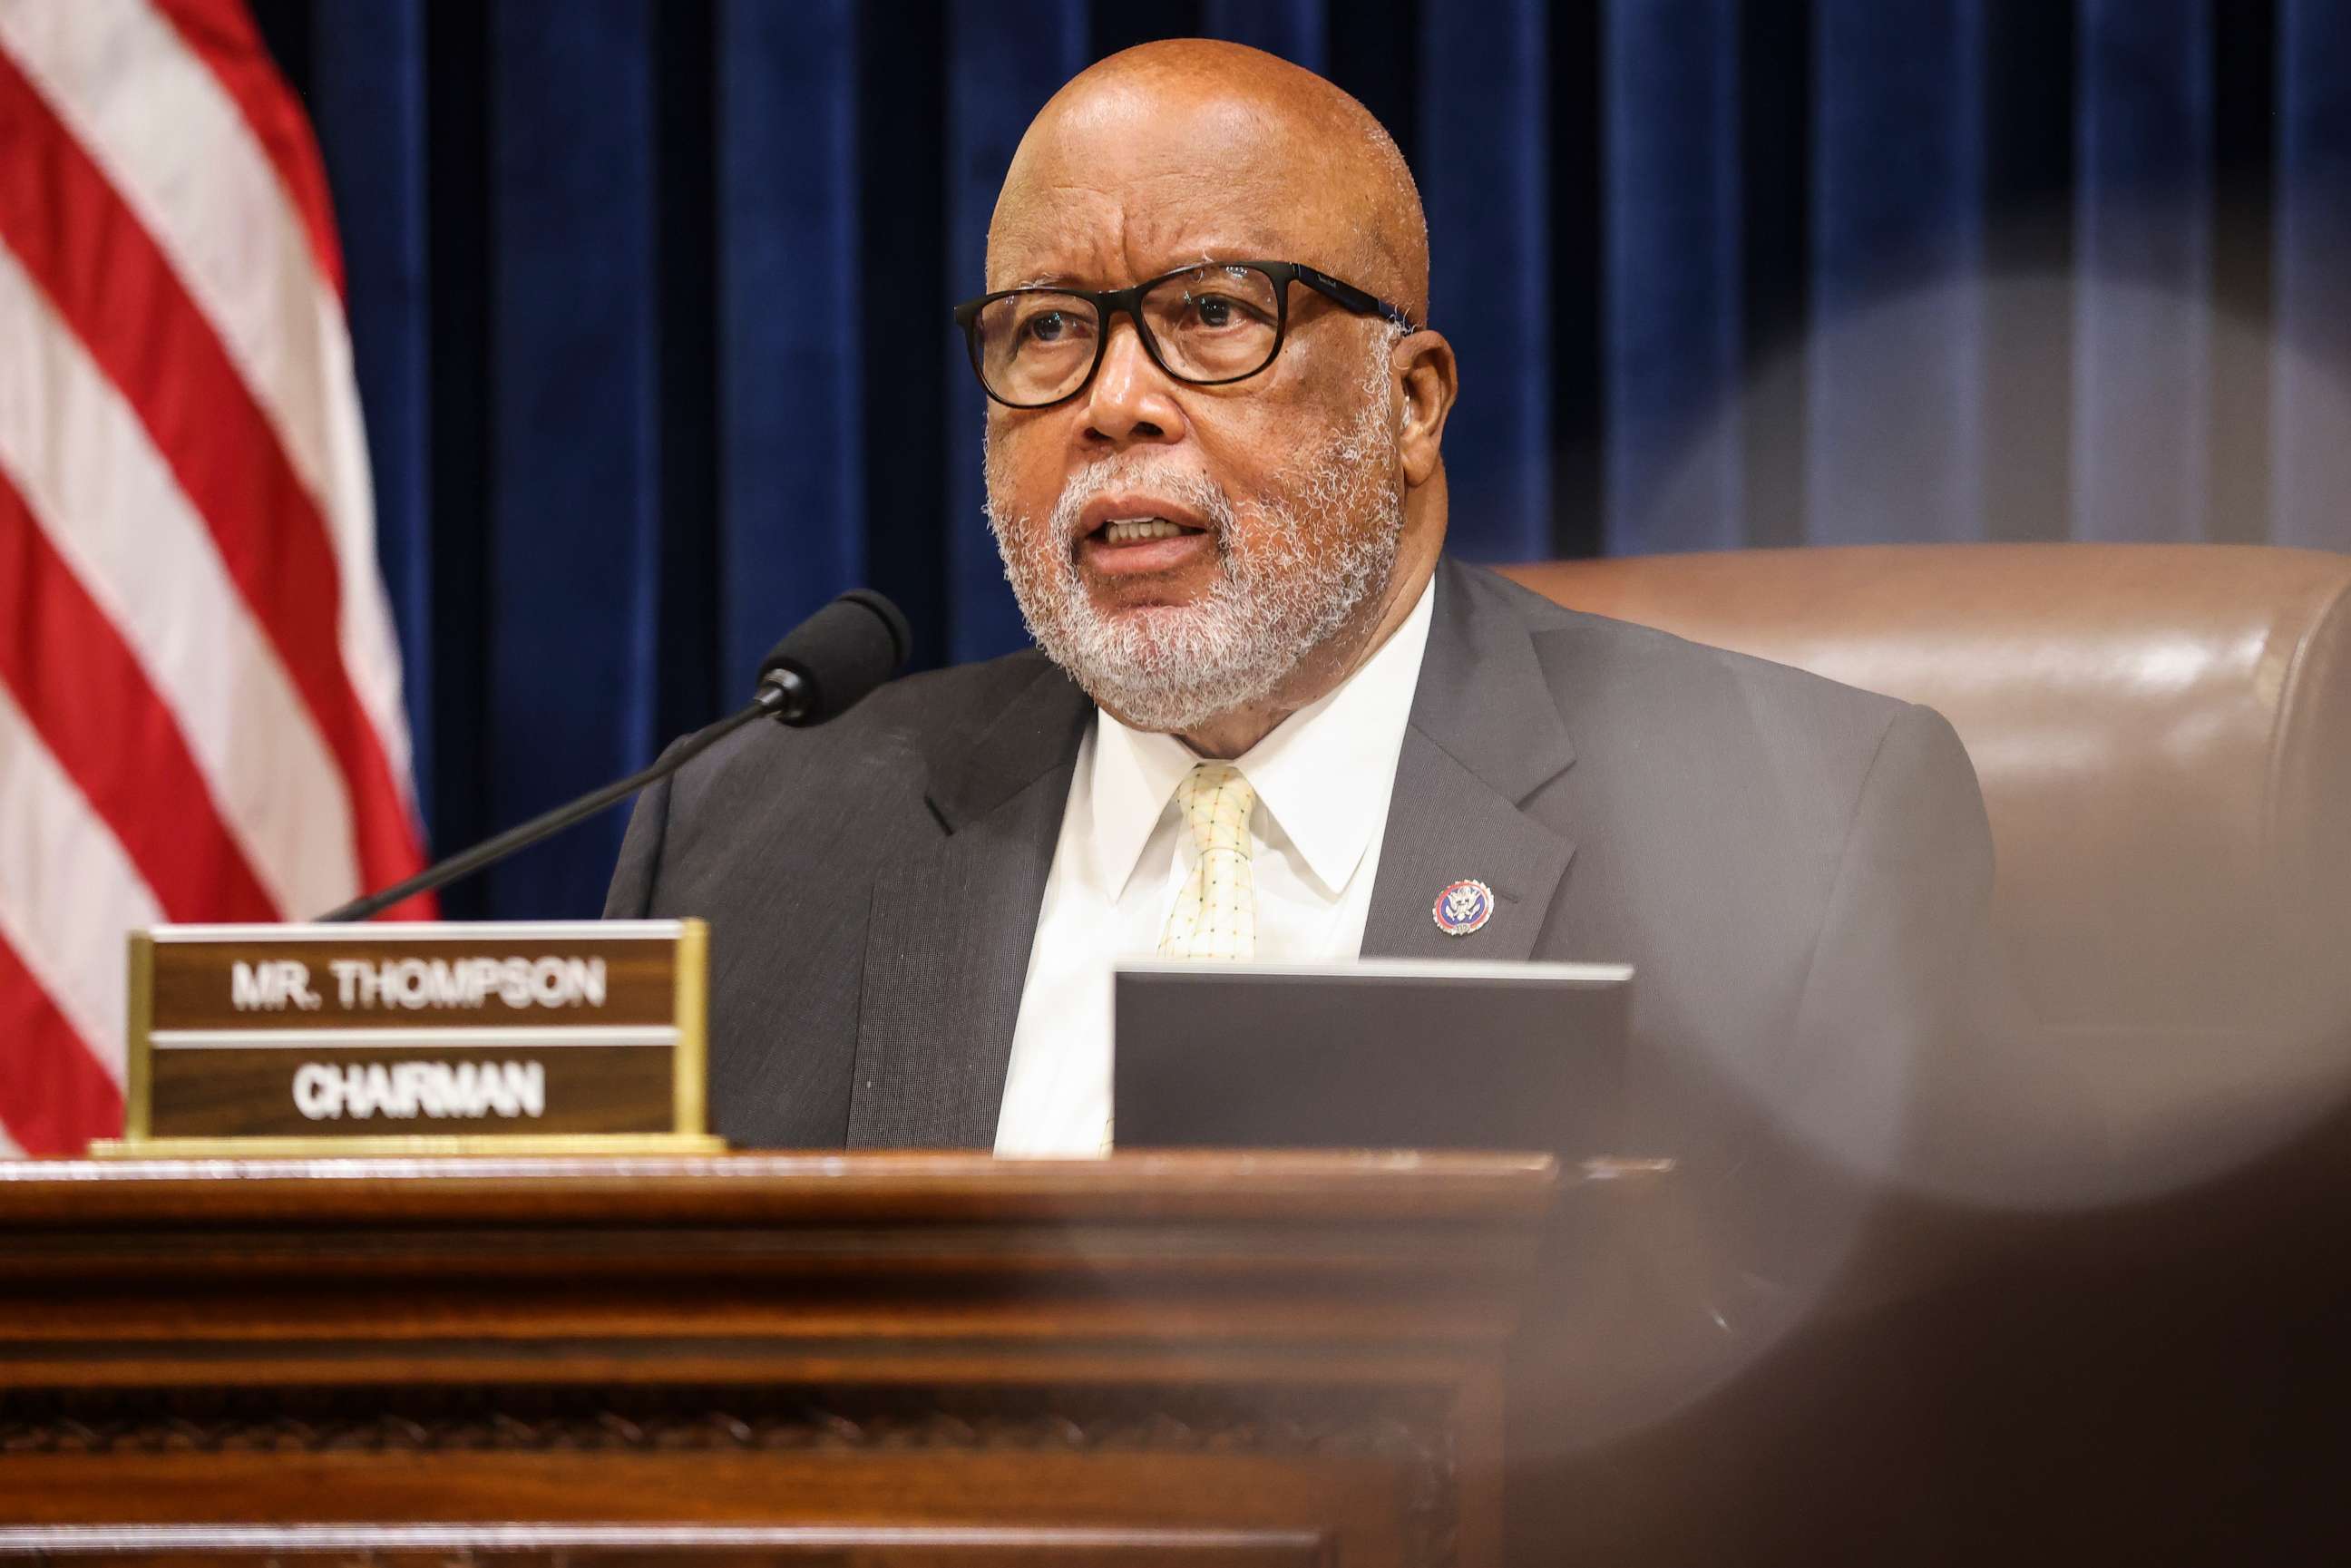 PHOTO: Chairman Rep. Bennie Thompson, D-MS, speaks during a hearing by the House Select Committee investigating the January 6 attack on the U.S. Capitol on July 27, 2021 at the Cannon House Office Building in Washington, DC.